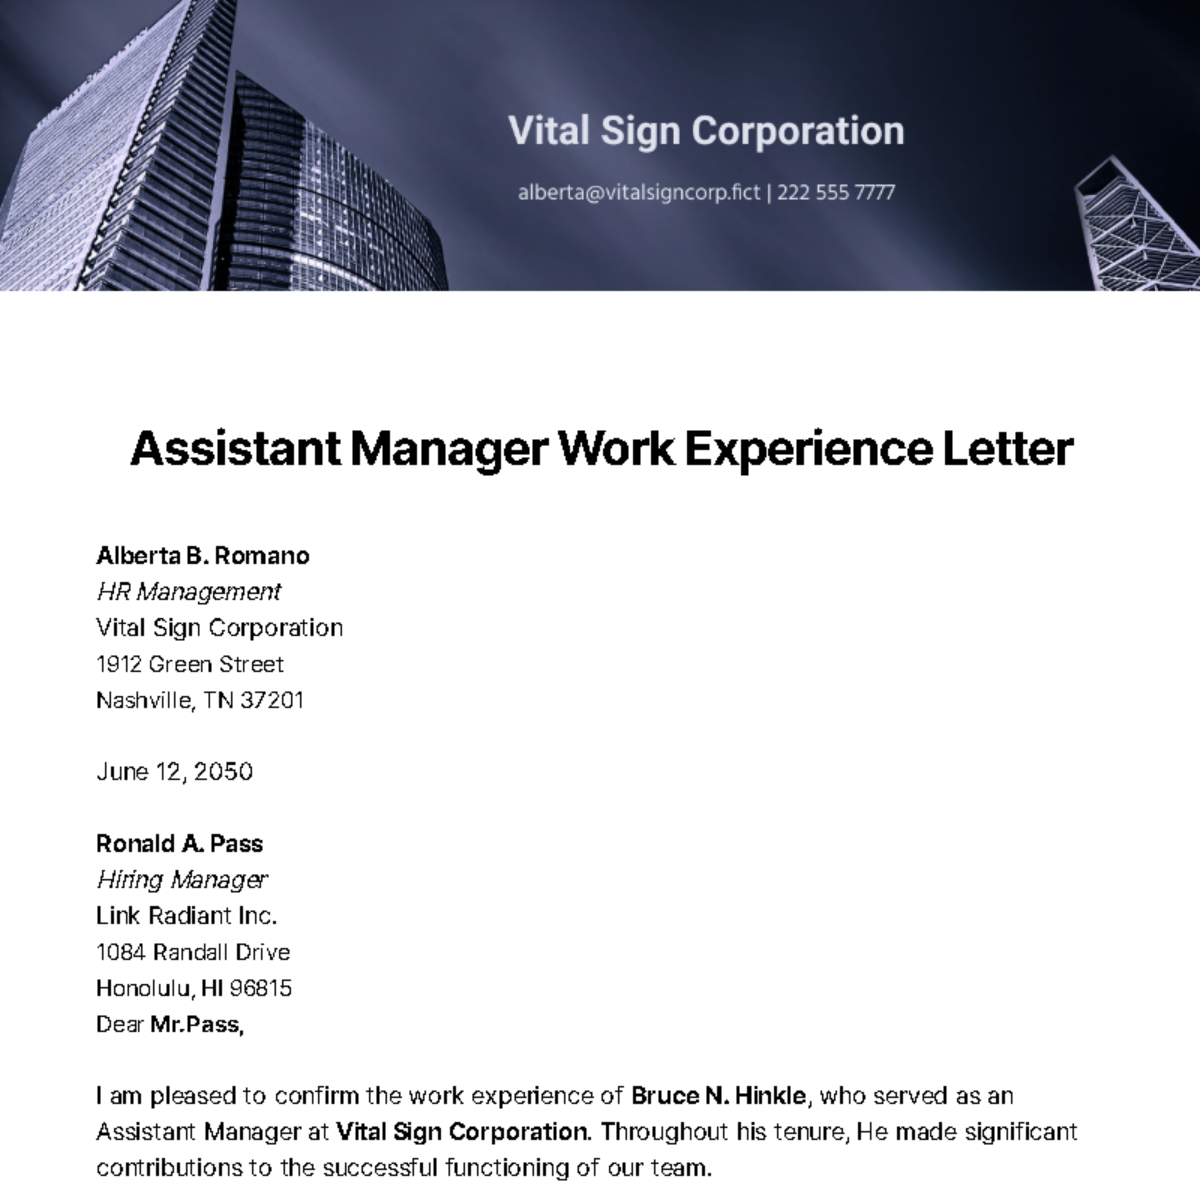 Assistant Manager Work Experience Letter Template